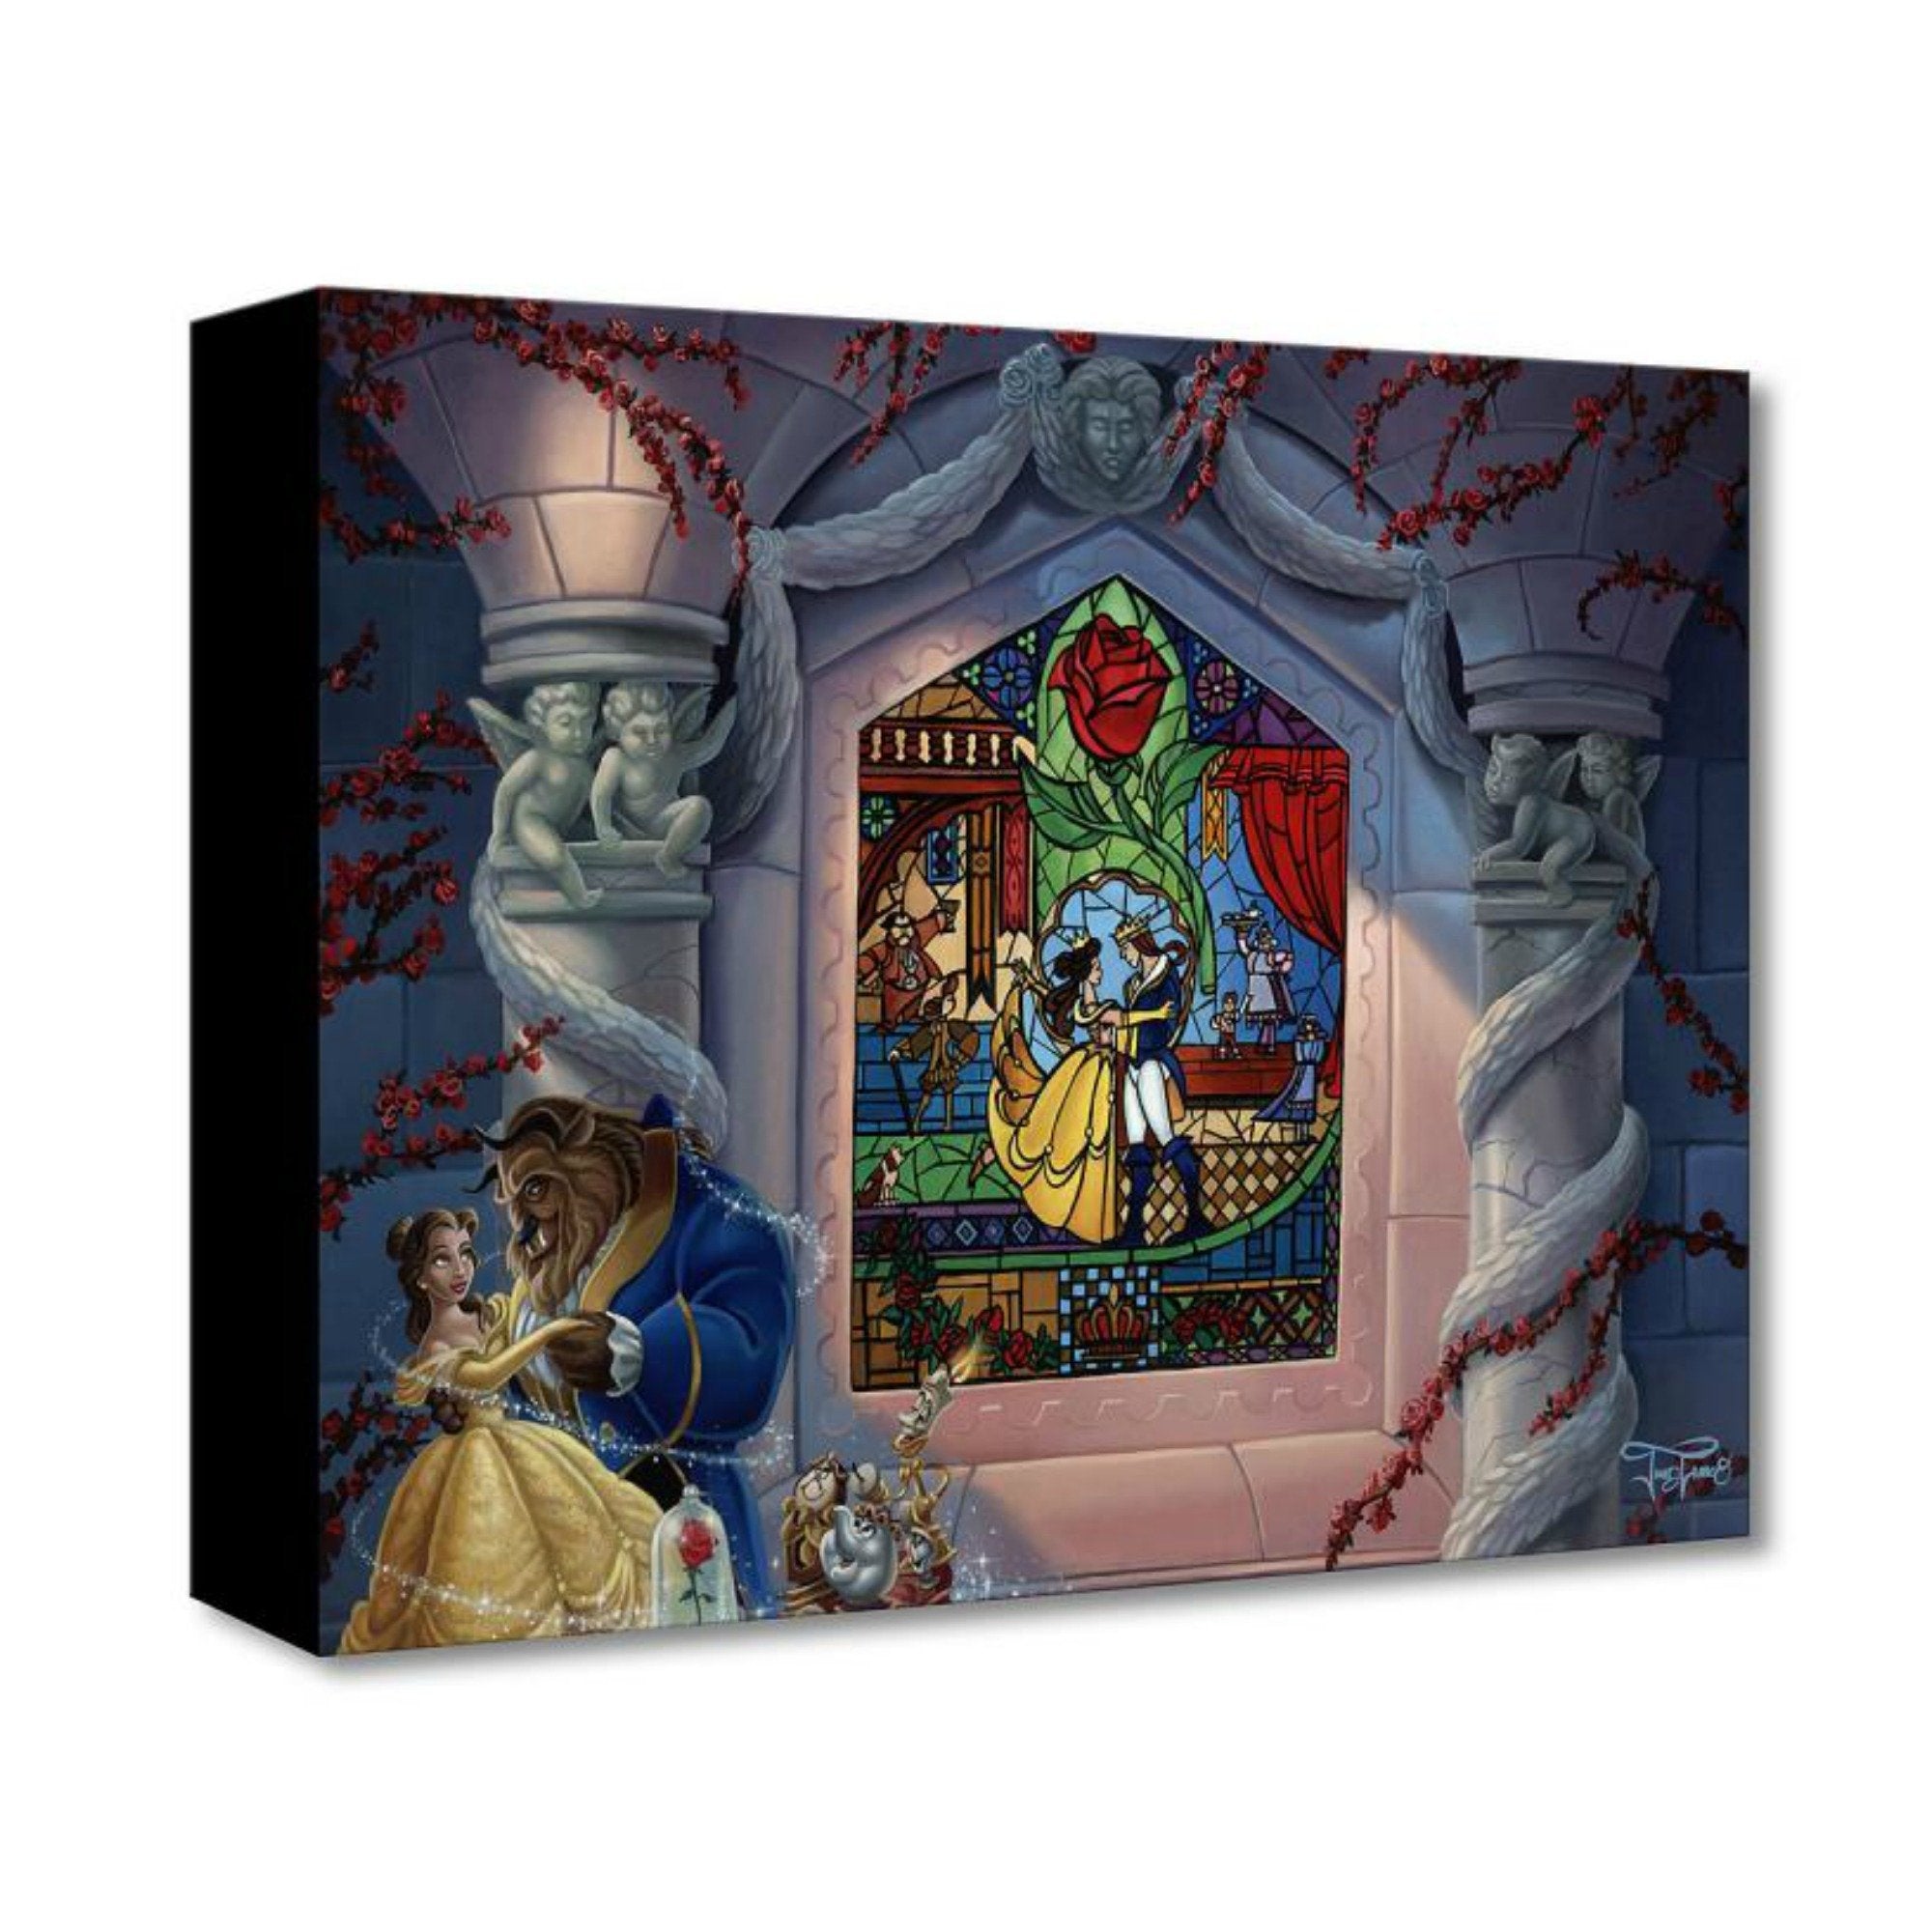 Enchanted Love by Jared Franco.  Belle and the Beast dancing in the castle's ballroom, a painted stain glass mural window of them in the background.